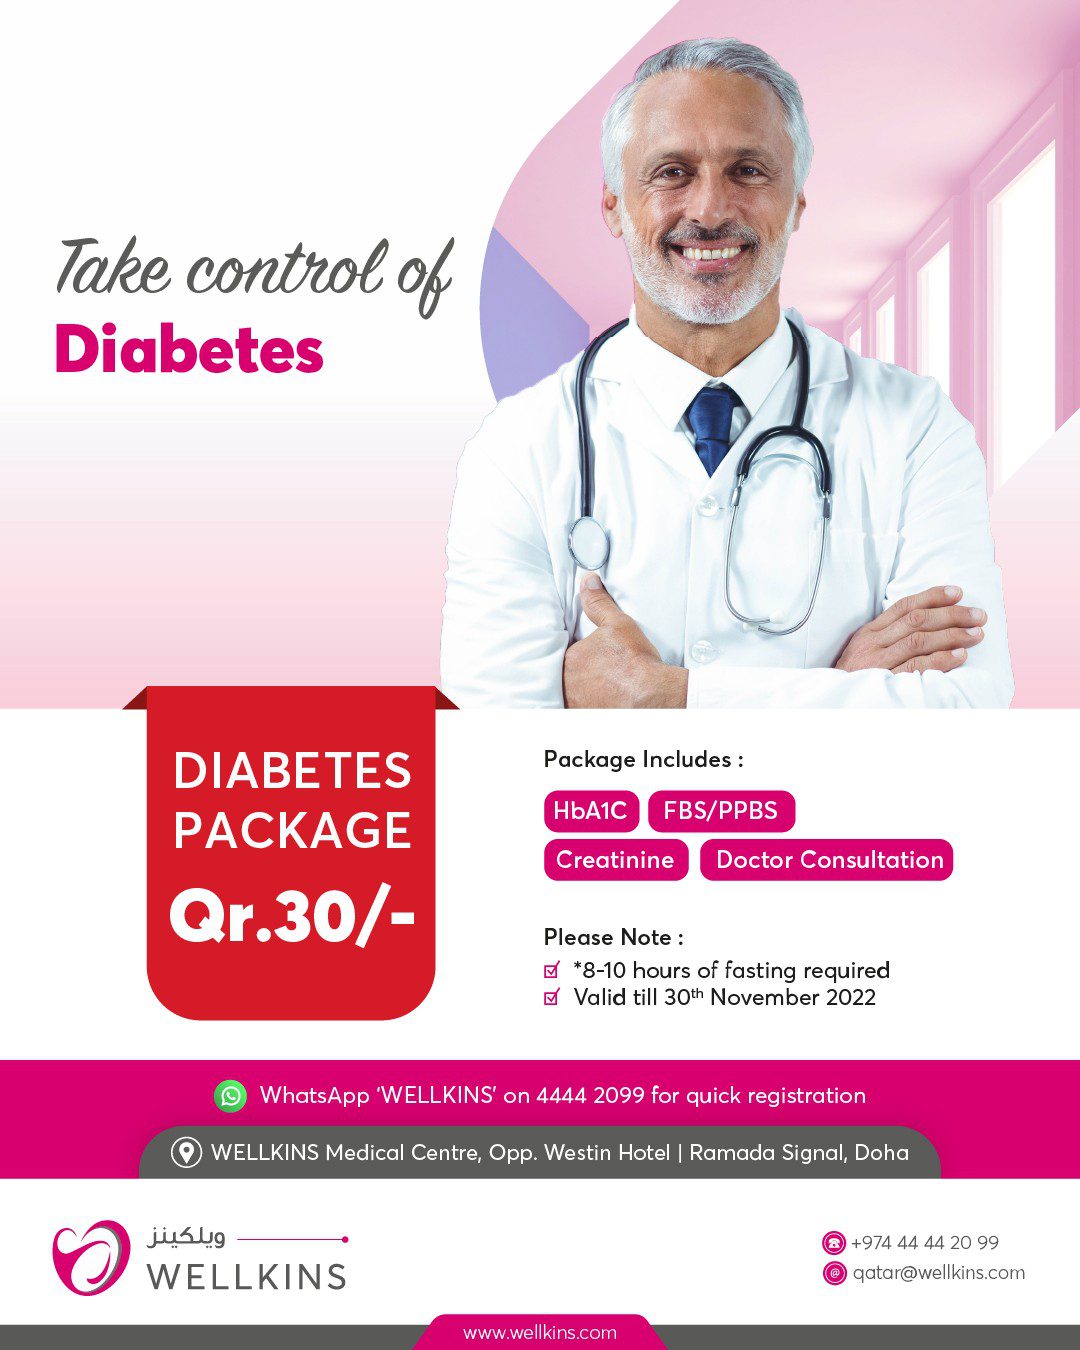 As a part of #WorldDiabetesDay, avail discounted Diabetes Package at WELLKINS Medical Centre, Opp Westin Hotel, Ramada, Doha for just QR.30/-.
Package includes;
✅HbA1C
✅FBS / PPBS
✅Creatinine
✅Doctor Consultation
Valid till 30th November 2022Know more about the diabetes package: https://wellkins.com/diabetespackage/
_______________________________
To learn more about #WELLKINSQATAR and our services, kindly visit our website www.wellkins.com
Helpline: 4444 2099
_______________________________
#Wellkinsqatar #wellkins #medicalcentre #WorldDiabetesDay #Qatar2022